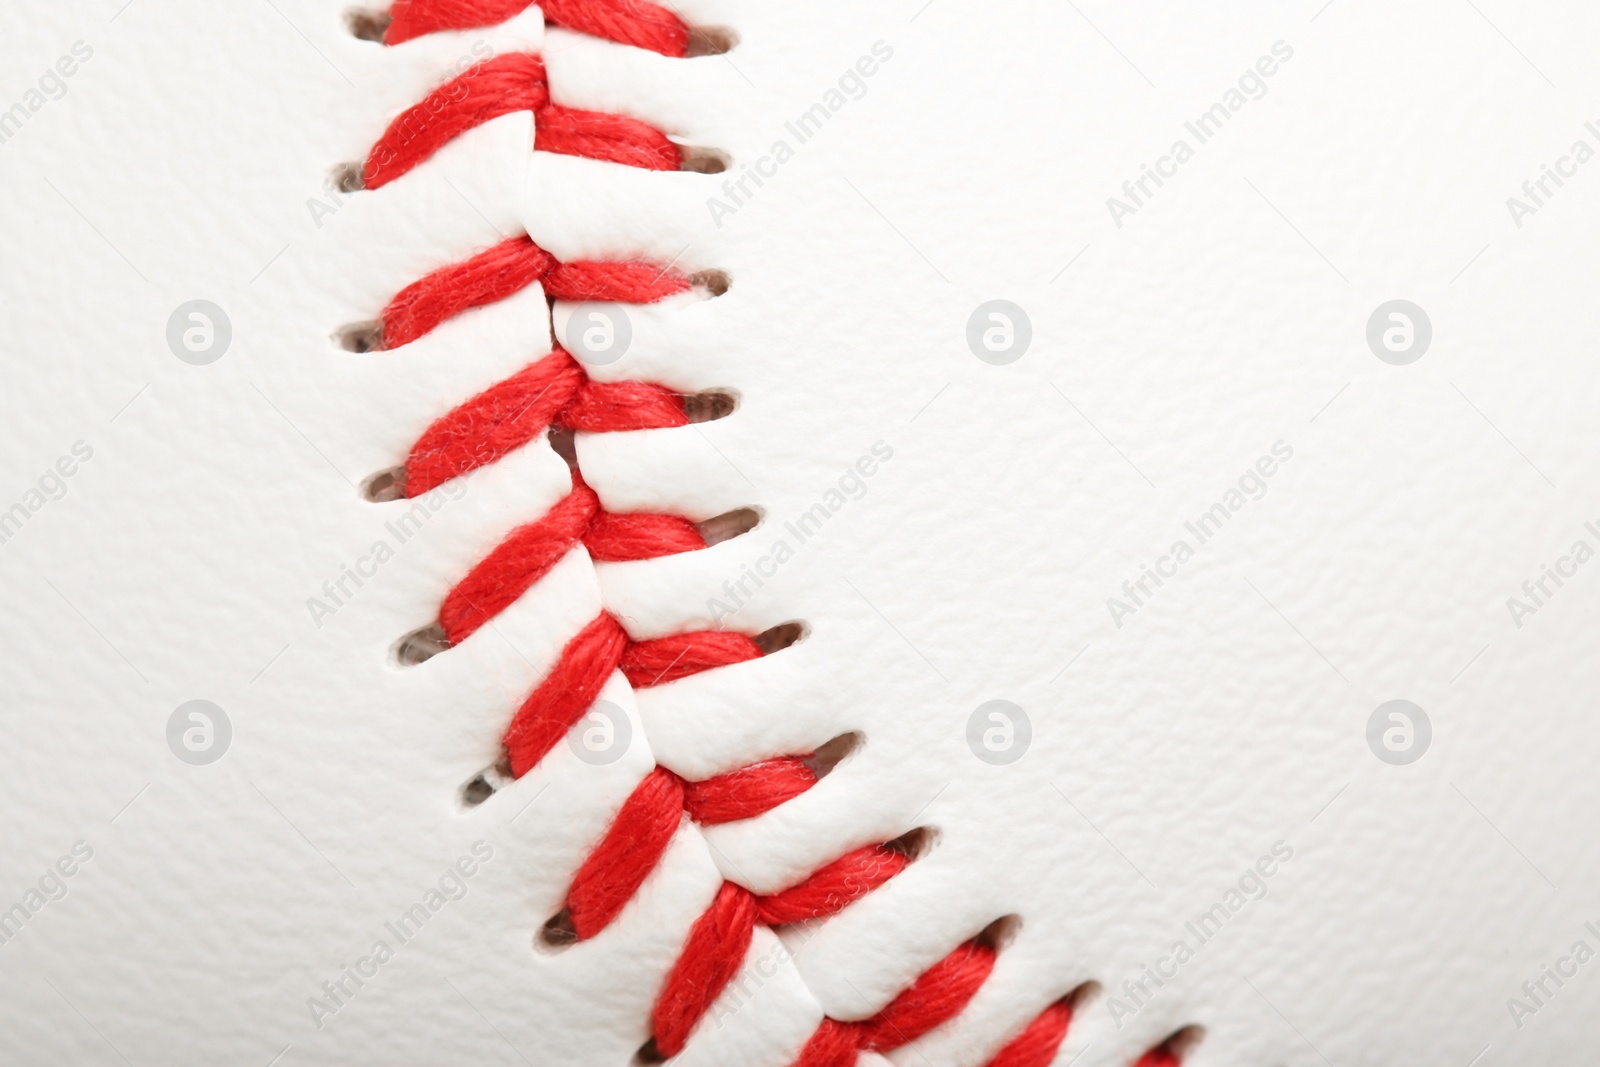 Photo of Baseball ball with stitches as background, closeup